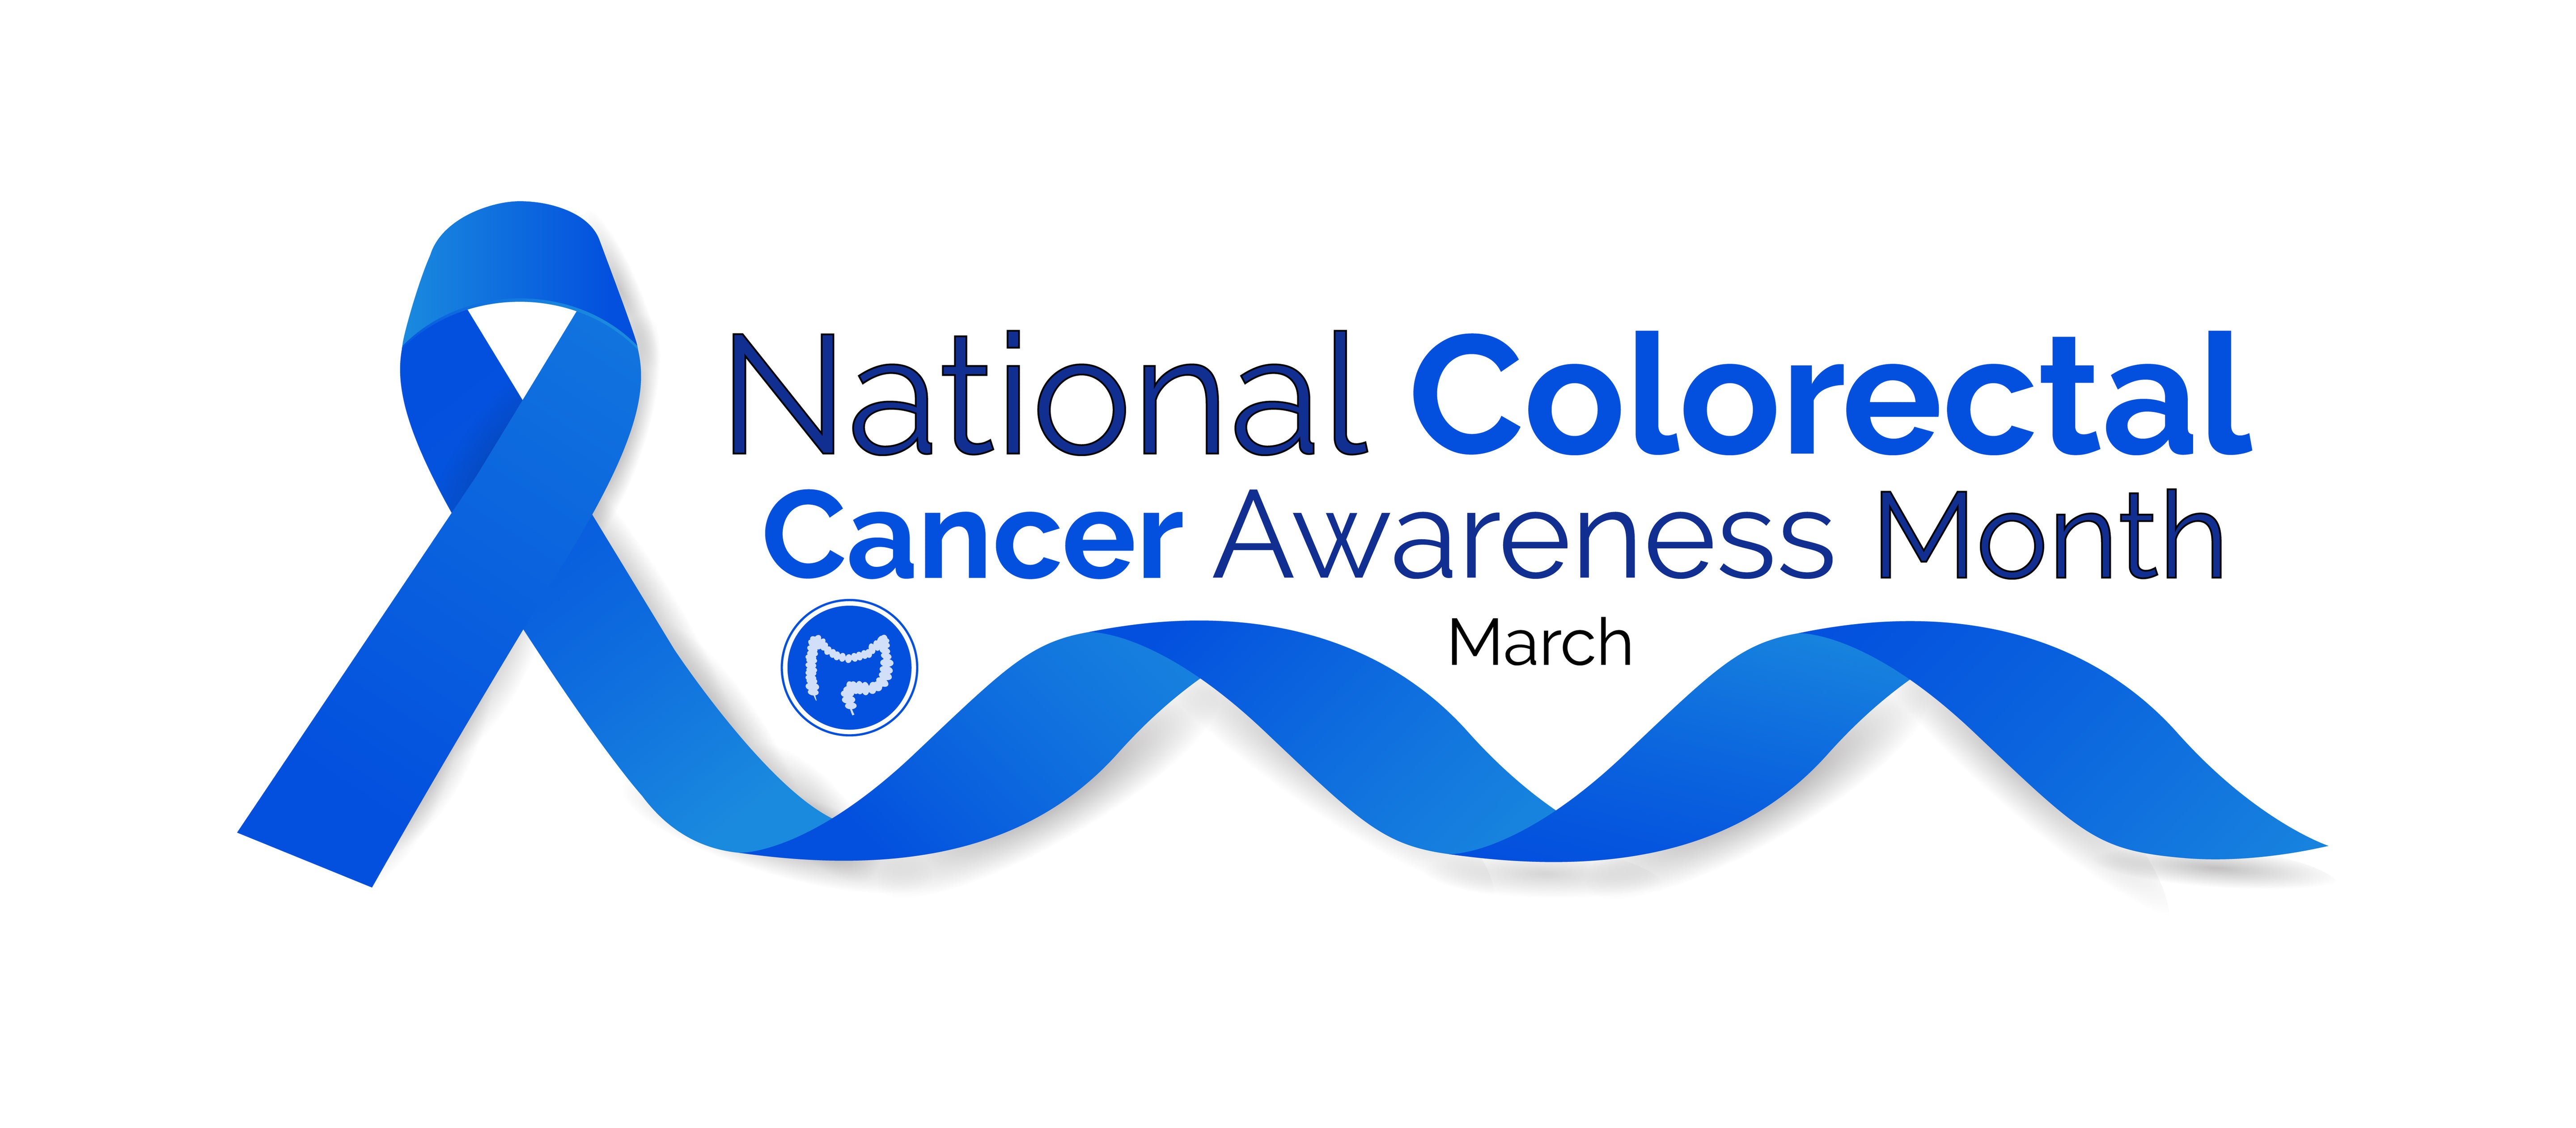 National Colorectal Cancer Awareness Month: Promoting Early Detection and Treatment